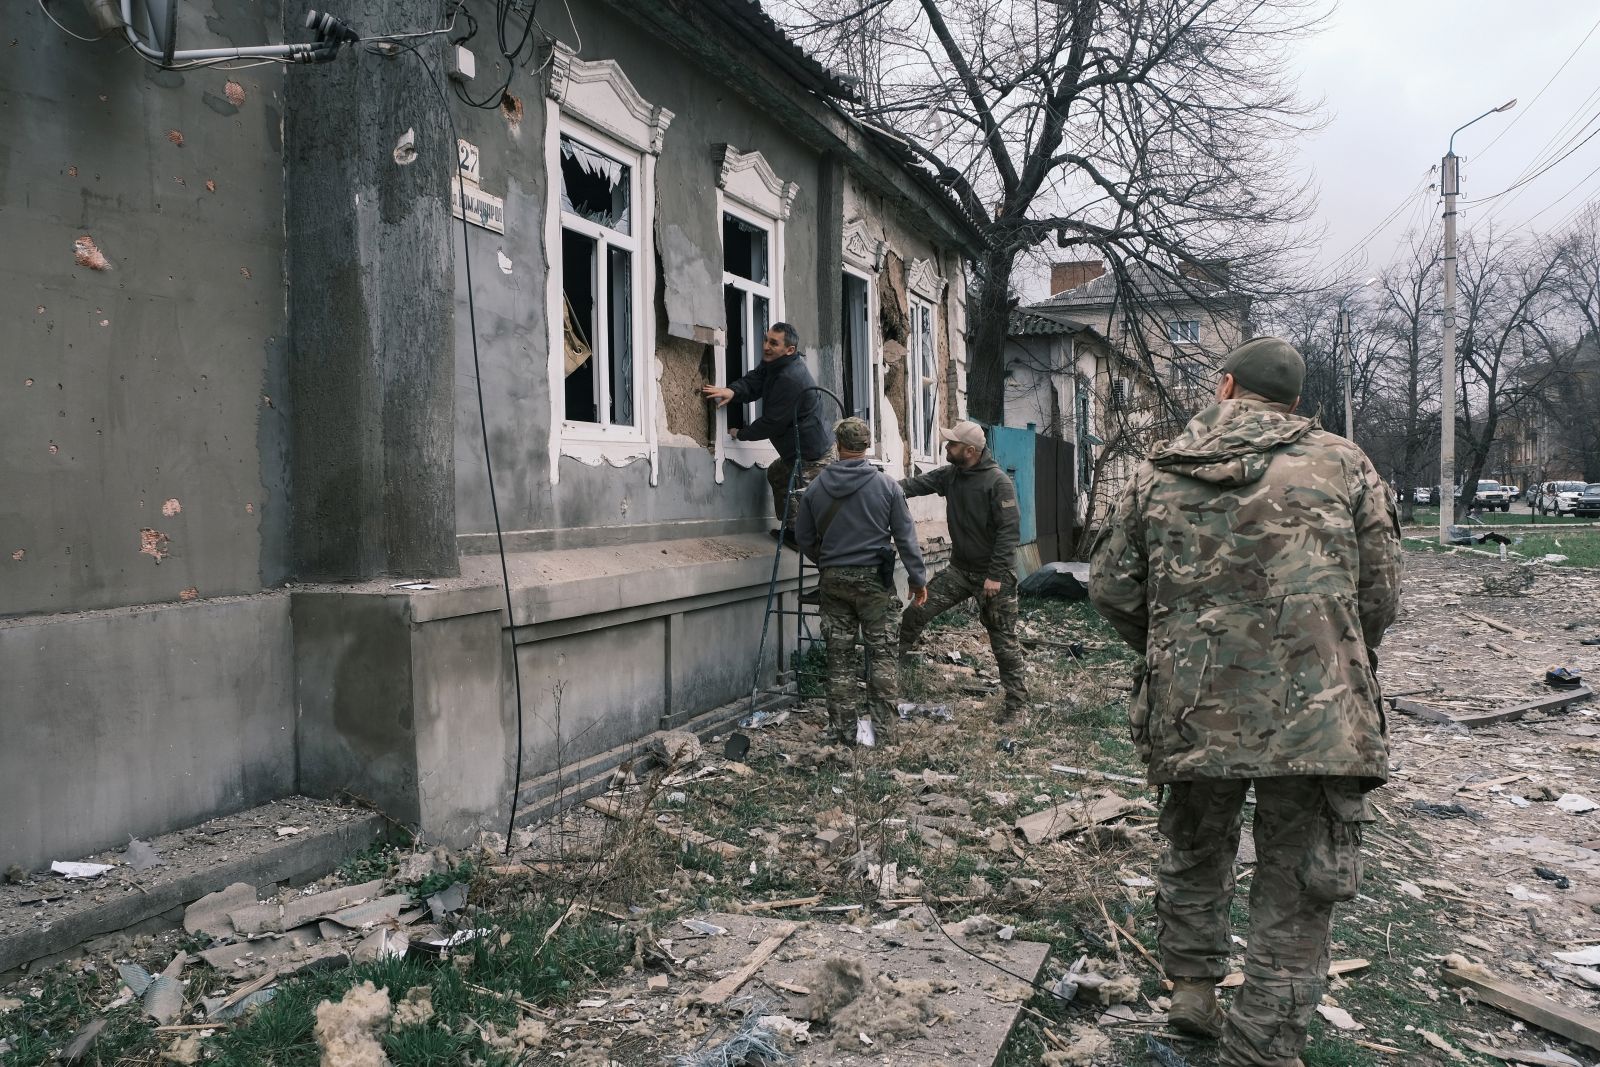 epa10545827 Investigators survey the damage after a missile strike in Sloviansk, Donetsk region, Ukraine, 27 March 2023. One person was killed and 25 people injured in Russian missile strikes on Sloviansk and Druzhkivka, according to the Head of the Donetsk Regional Military Administration, Pavlo Kyrylenko. Russian troops on 24 February 2022, entered Ukrainian territory, starting a conflict that has provoked destruction and a humanitarian crisis.  EPA/Maria Senovilla